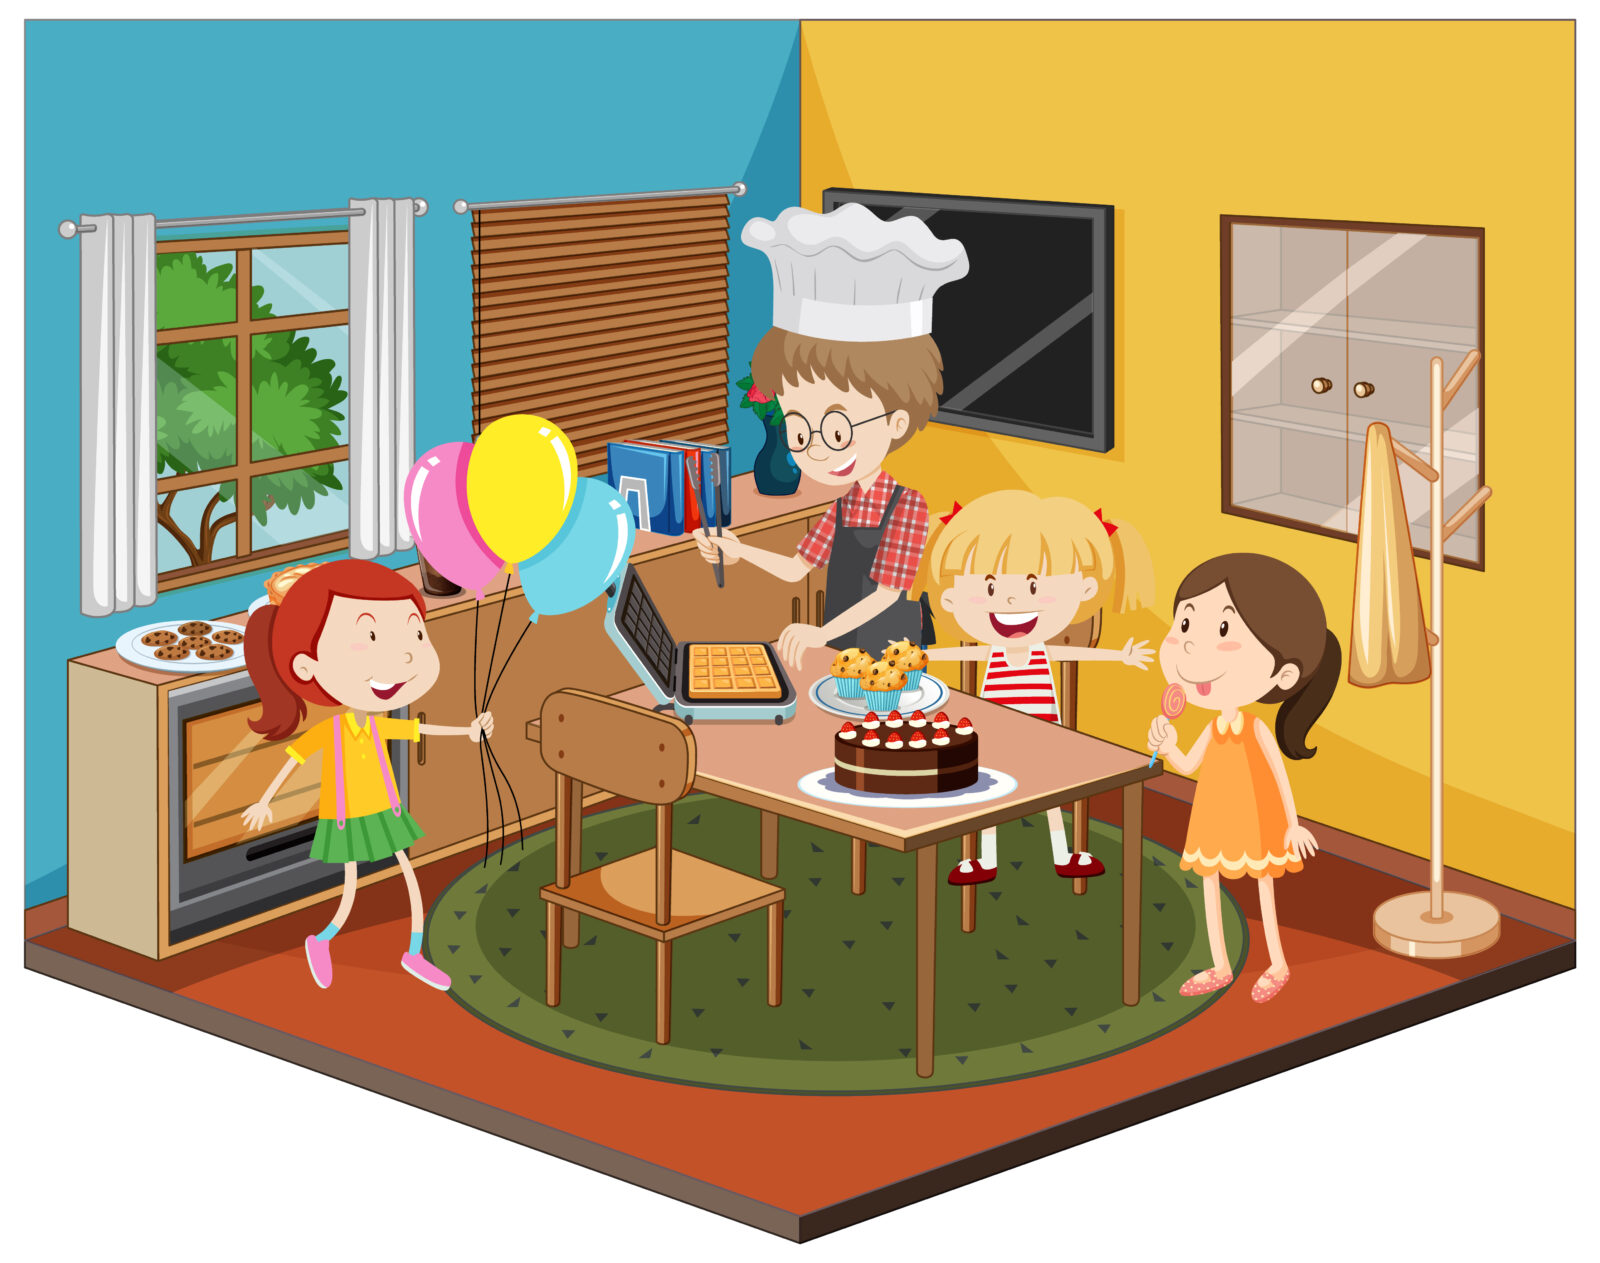 Children in the kitchen with party theme illustration